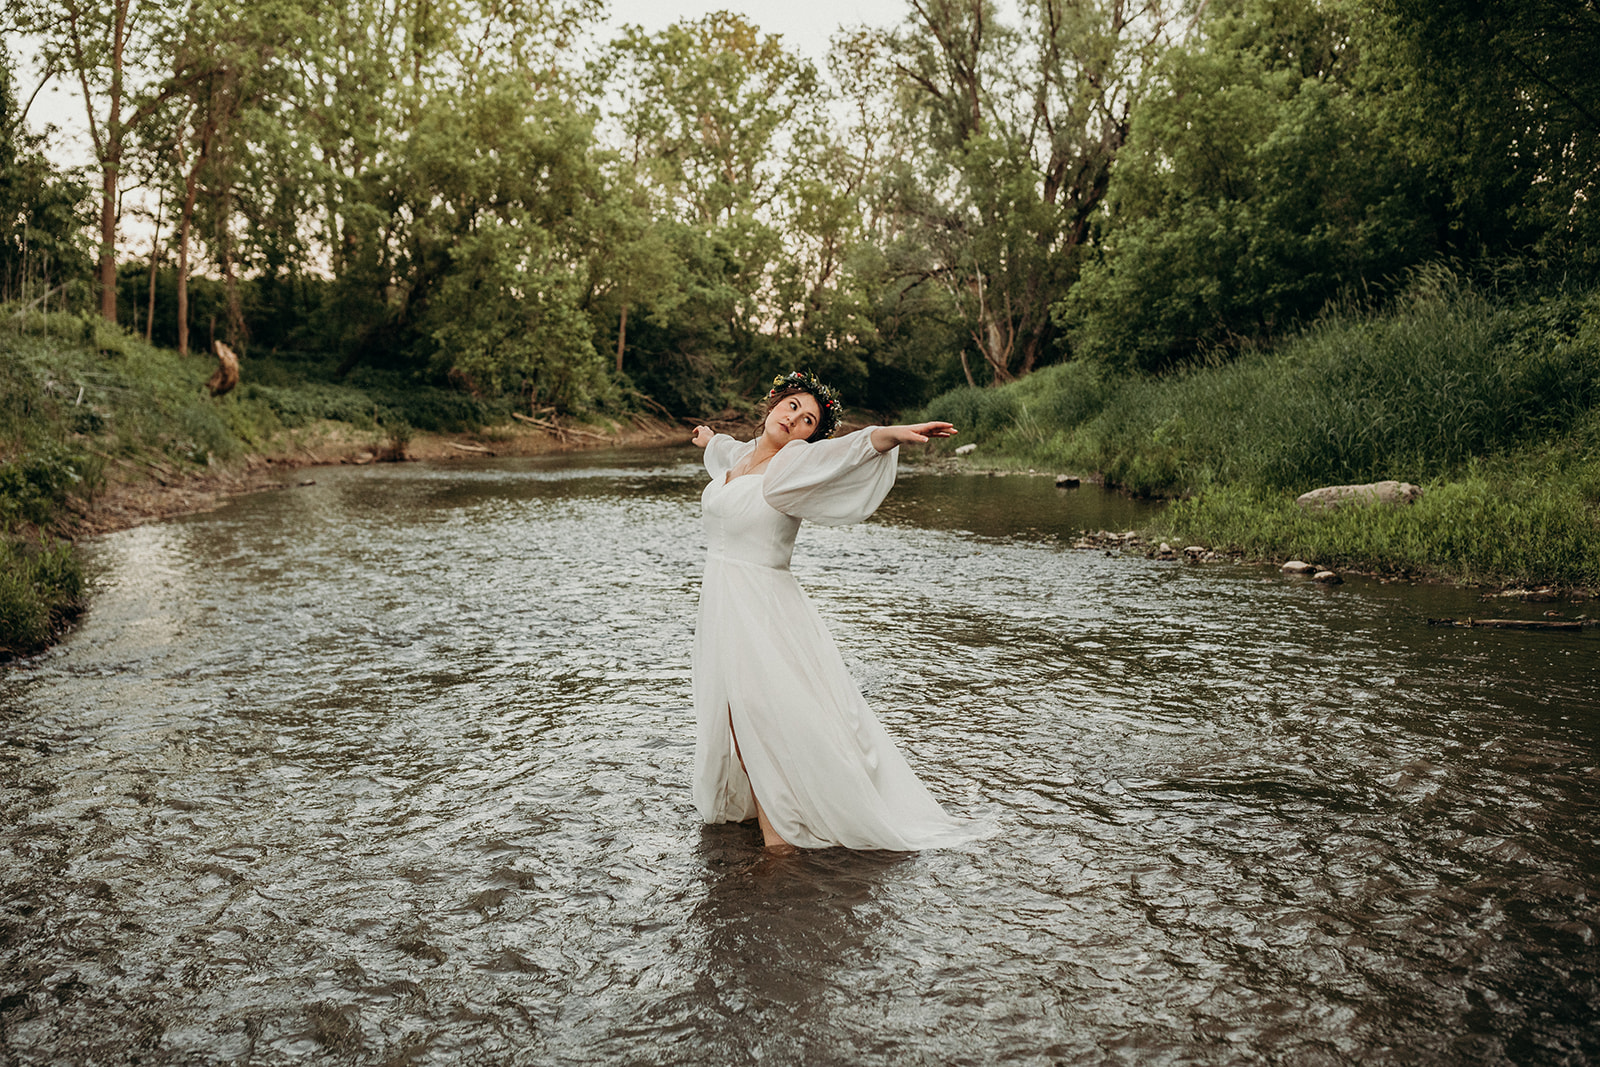 Stress free wedding planning includes being okay with getting in the water!